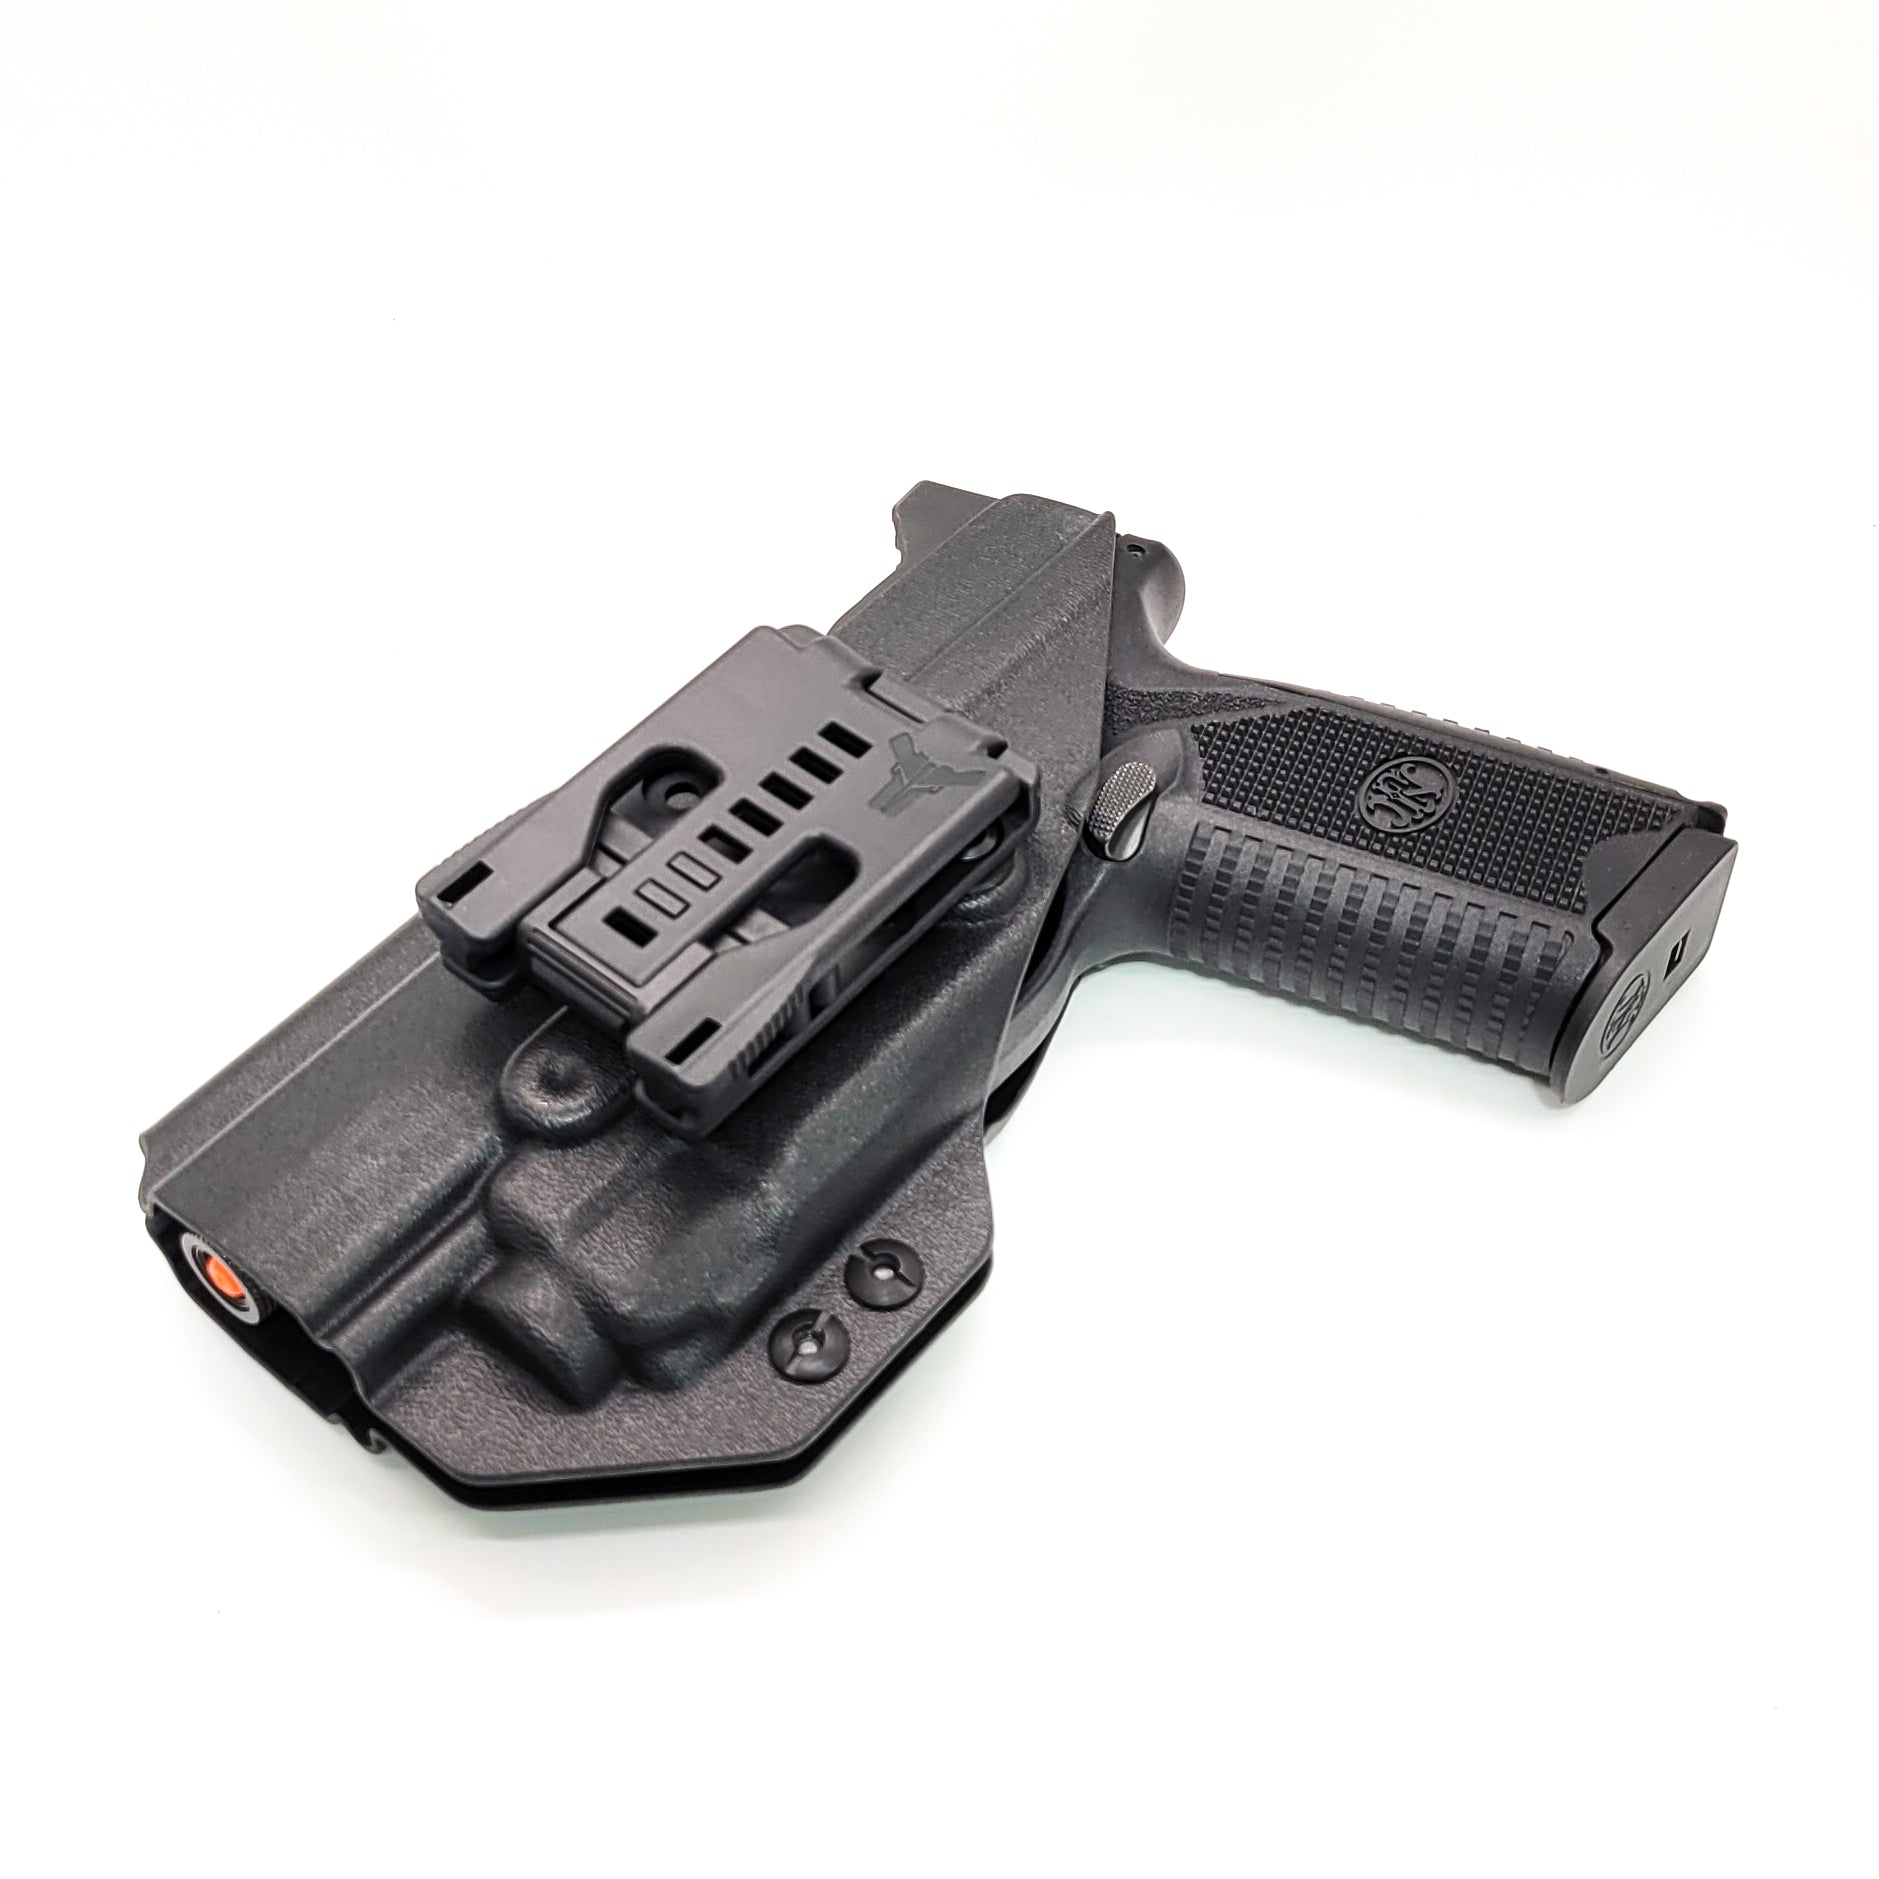 Outside Waistband OWB Taco Style Kydex Holster for the FN 509 compact, 509 or 509 Tactical with the Streamlight TLR-8 or TLR-8A. Open Muzzle, adjustable retention, cleared for suppressor height sights up to 3/8", full sweat guard, cut for red dot sights and optics. Made in the USA. 4BROS Holster TLR8 TLR 8A TLR 8 